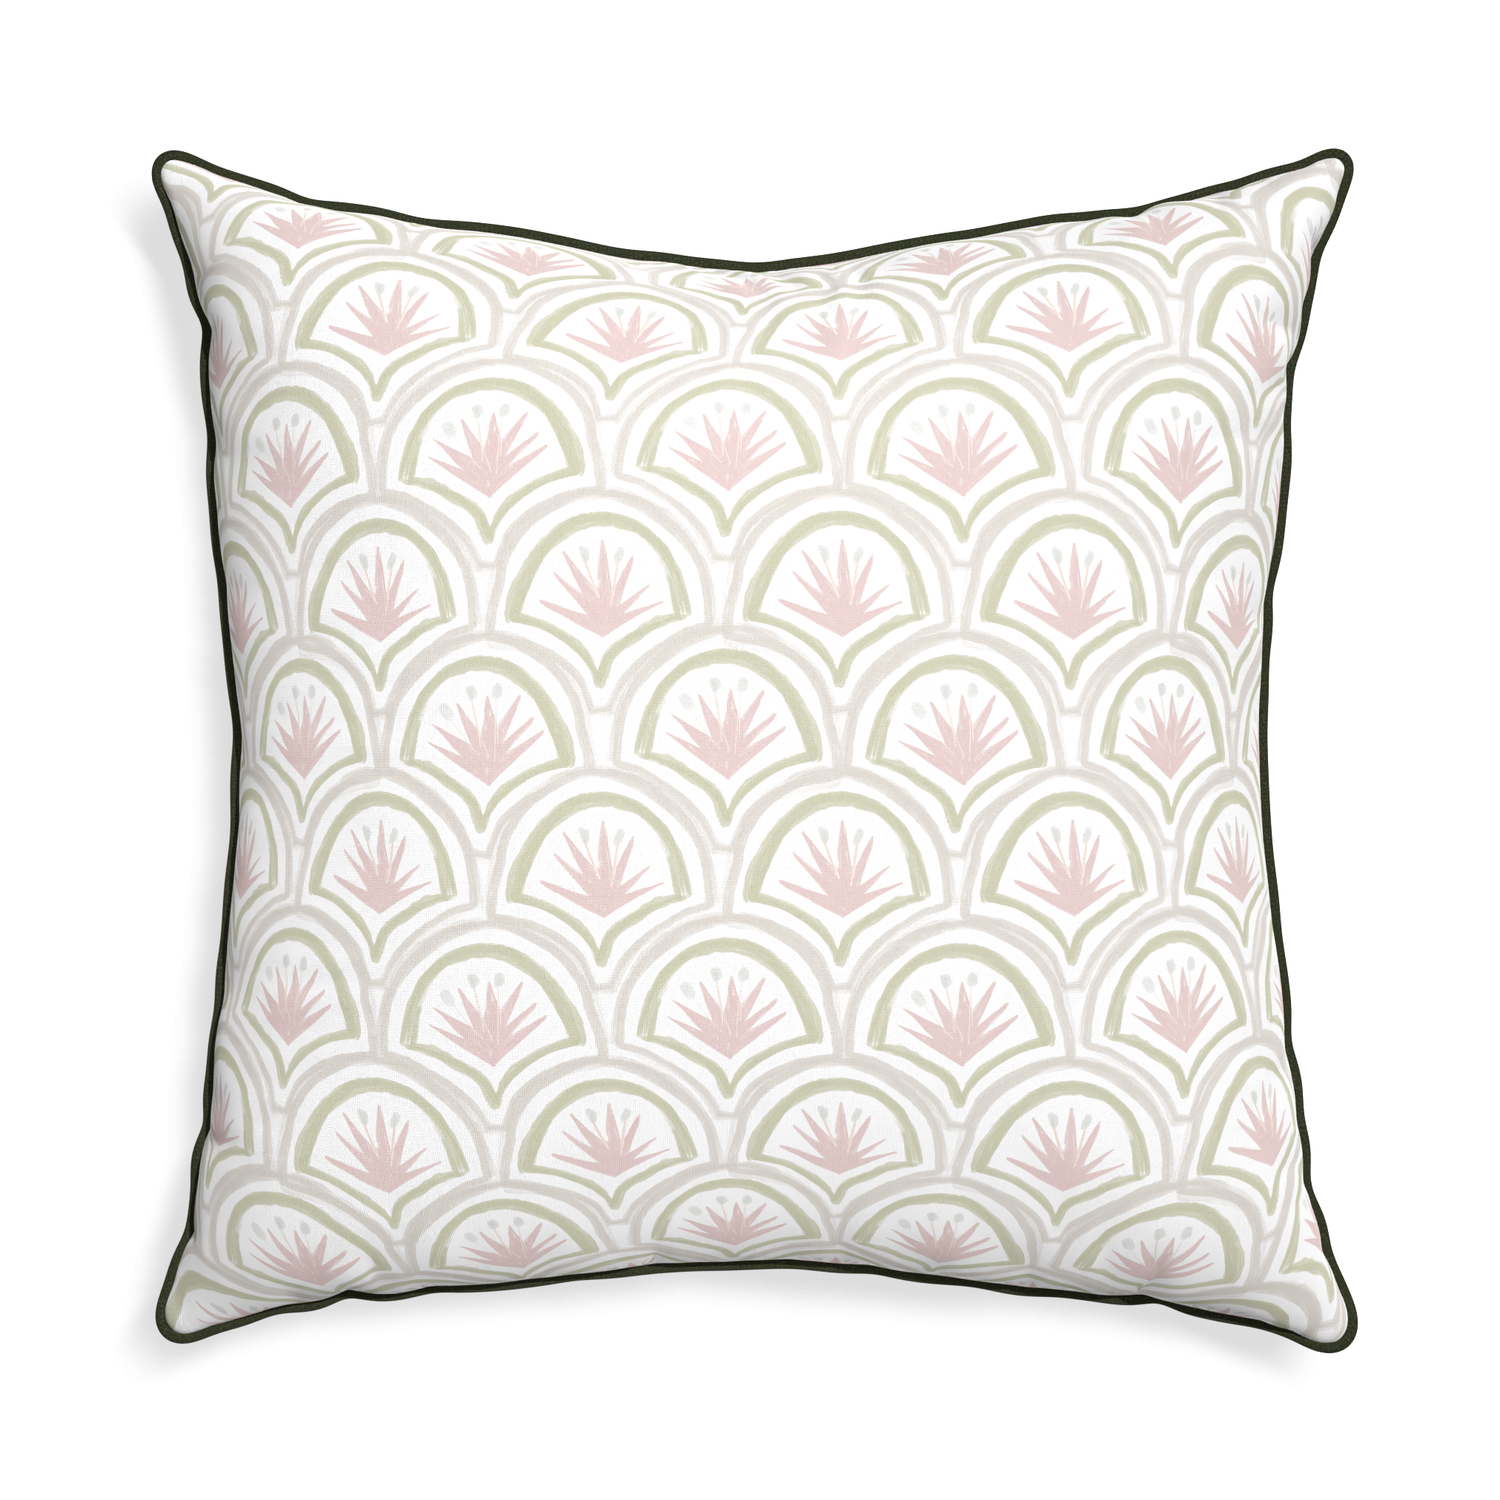 Euro-sham thatcher rose custom pink & green palmpillow with f piping on white background